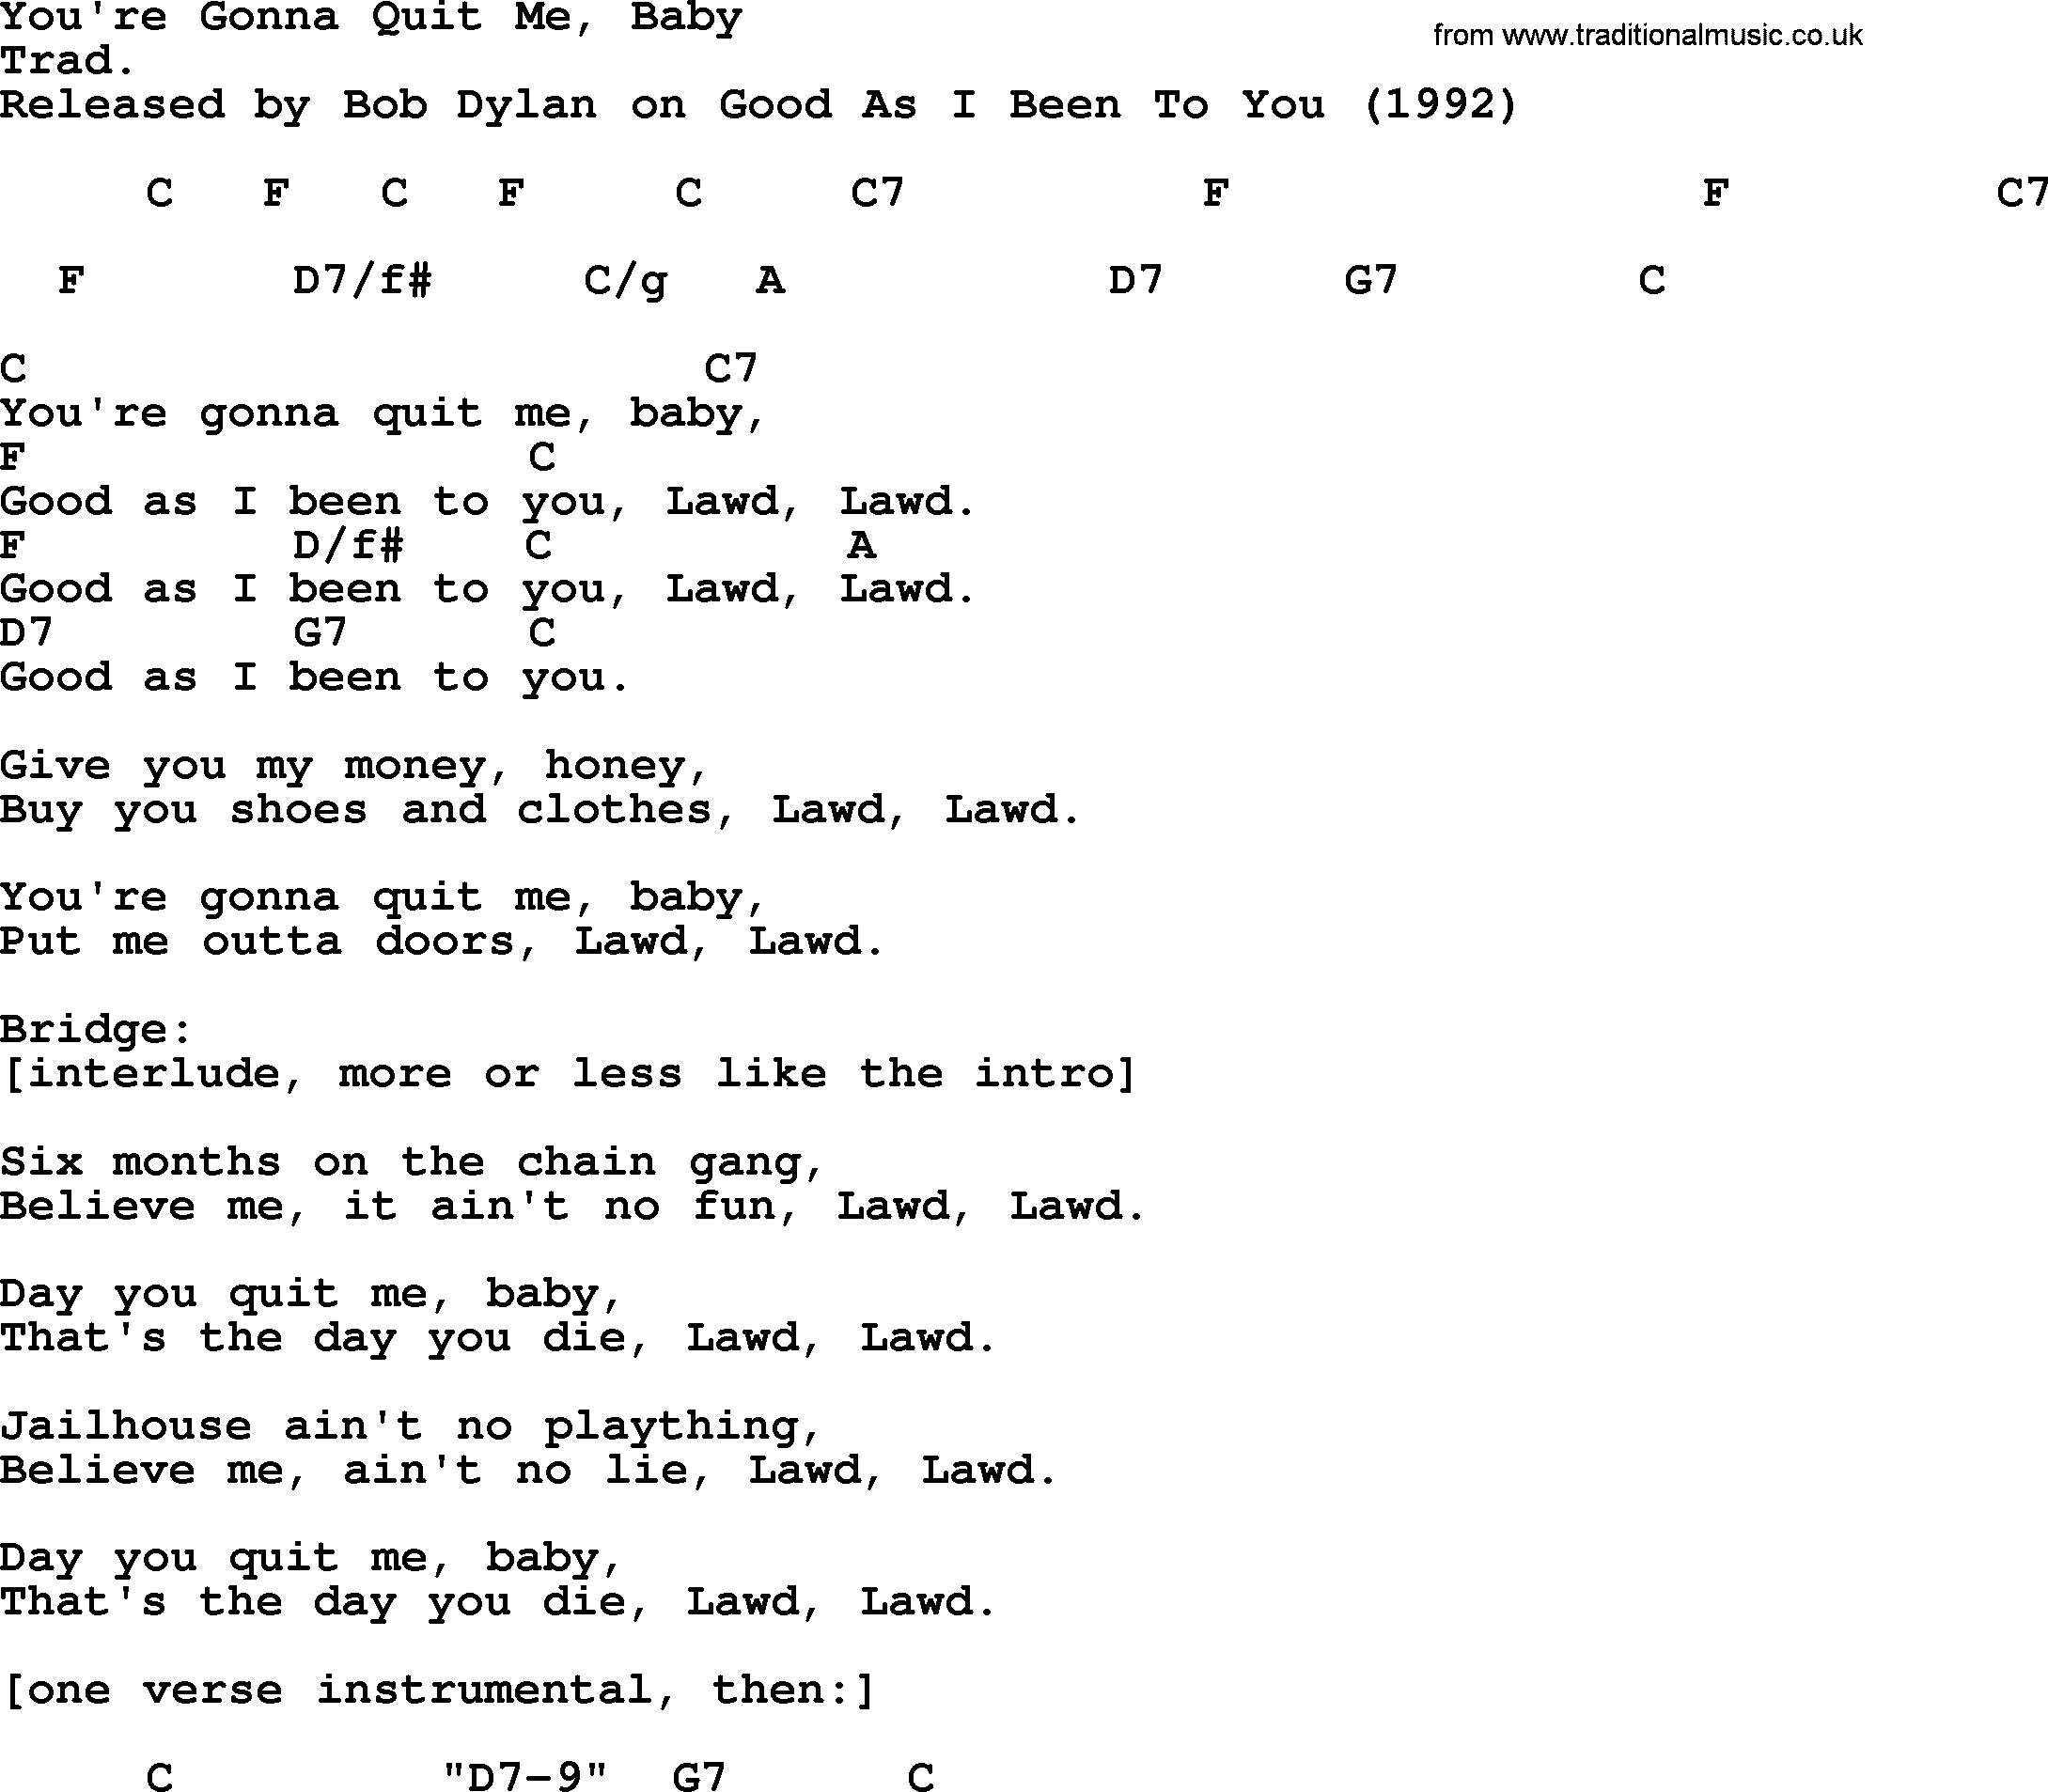 Bob Dylan song, lyrics with chords - You're Gonna Quit Me, Baby